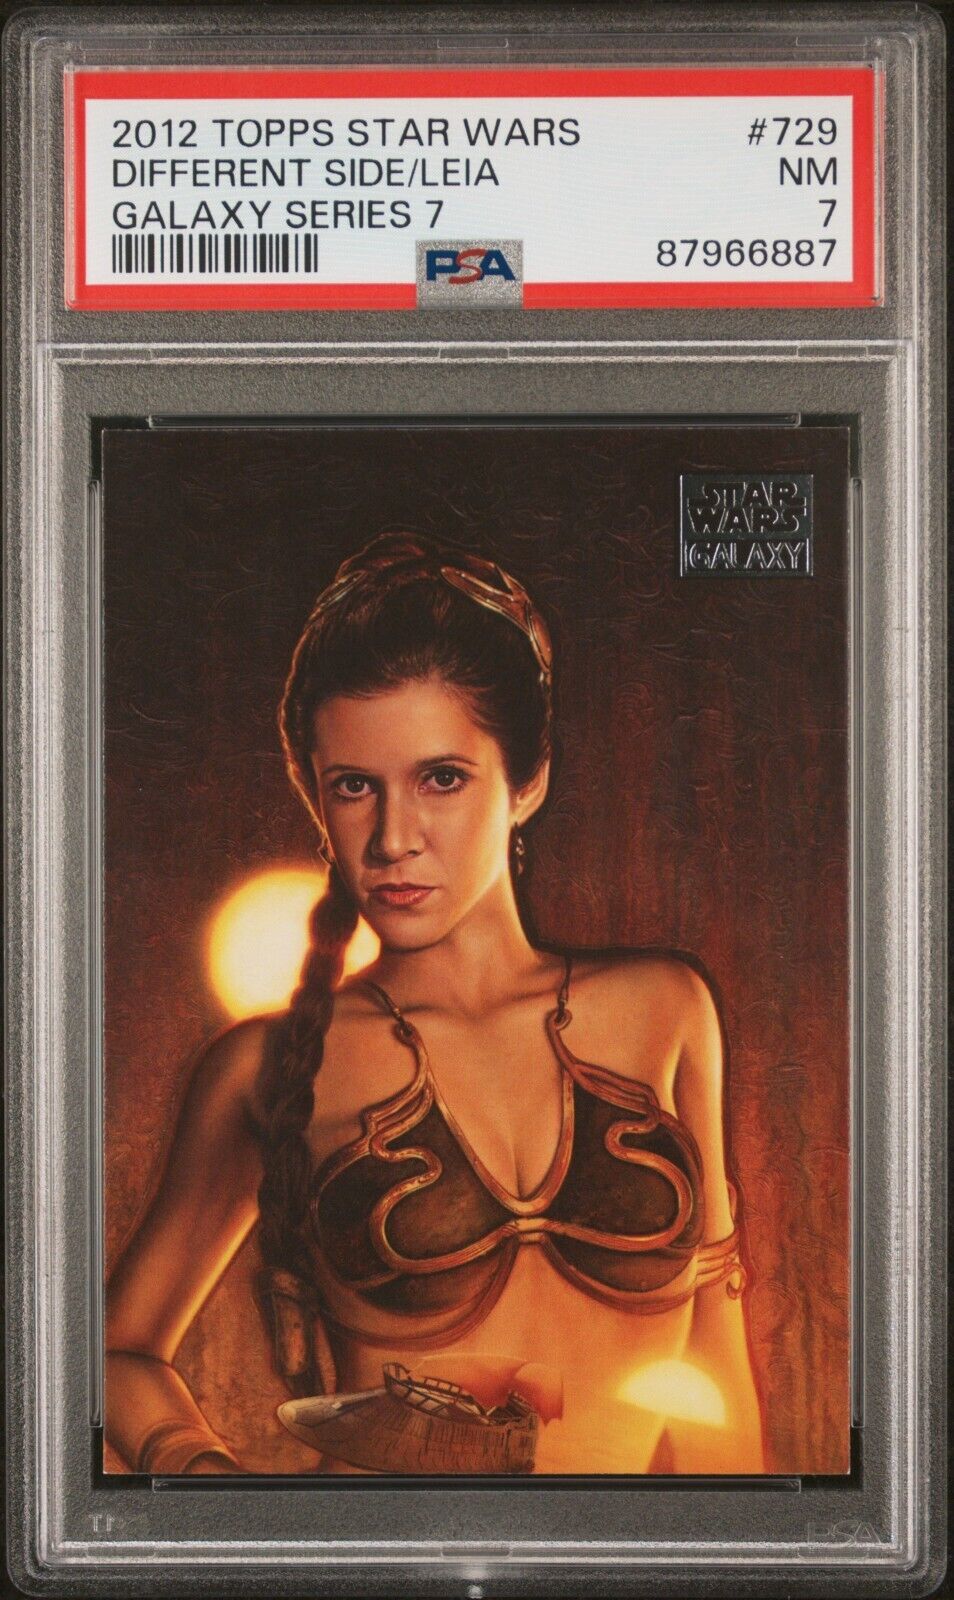 2012 TOPPS STAR WARS GALAXY SERIES 7 729 A DIFFERENT SIDE OF LEIA PSA 7